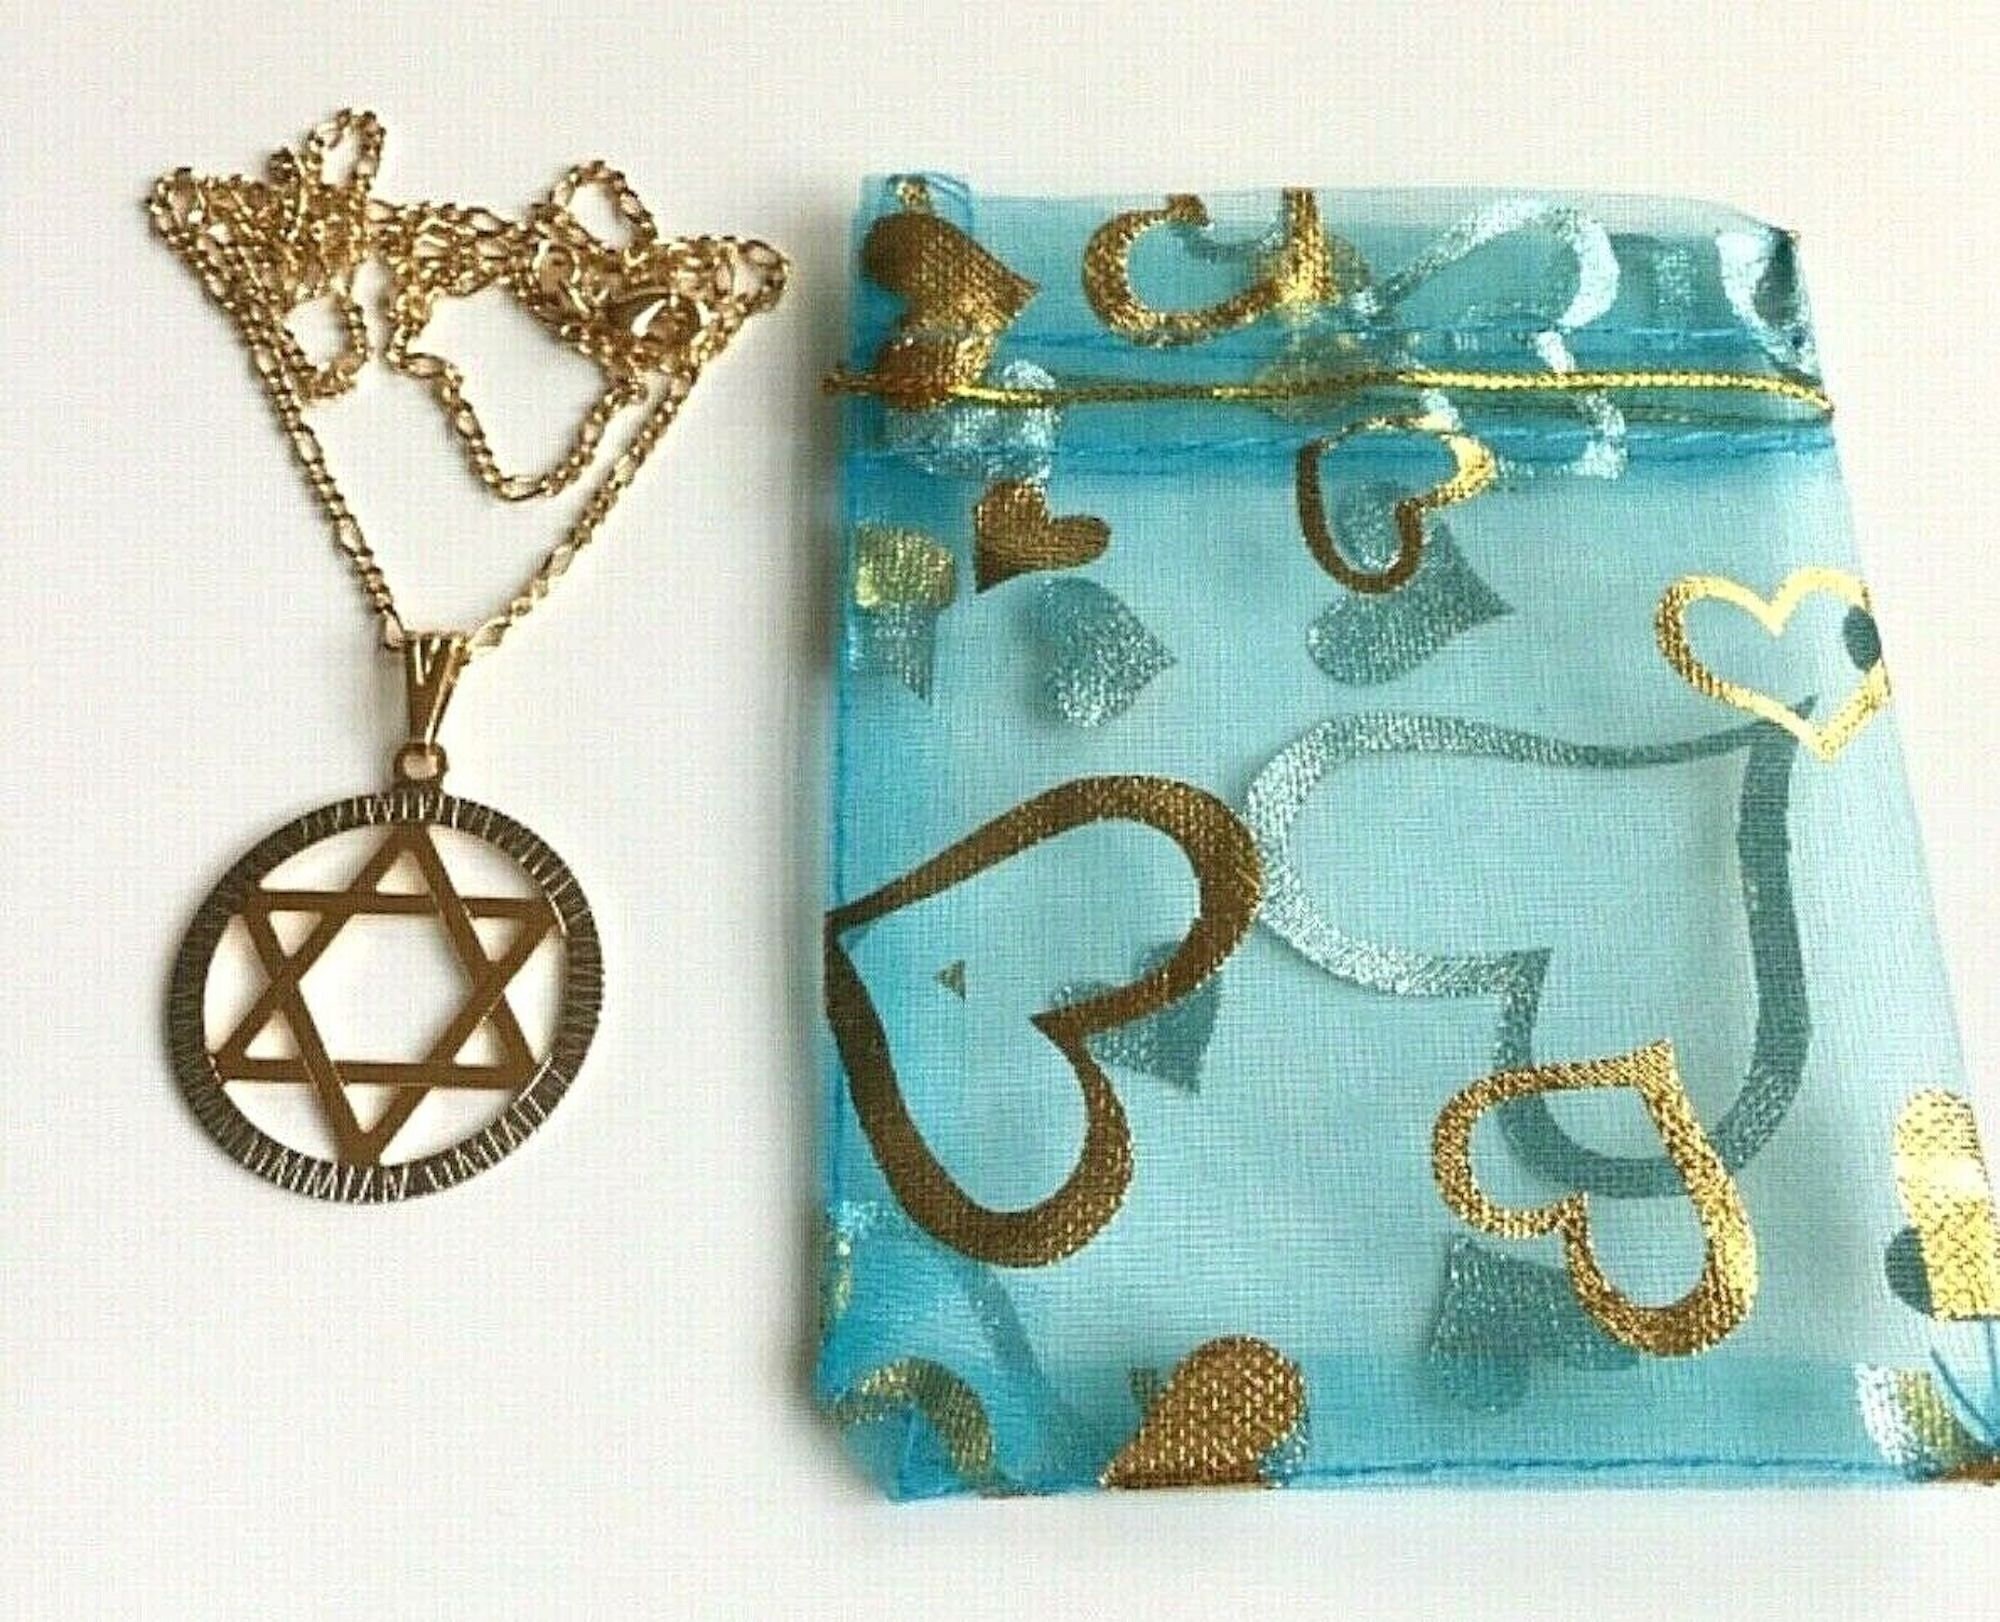 Authentic Louis Vuitton Star Pendant on 18 Gold Filled Figaro Chain